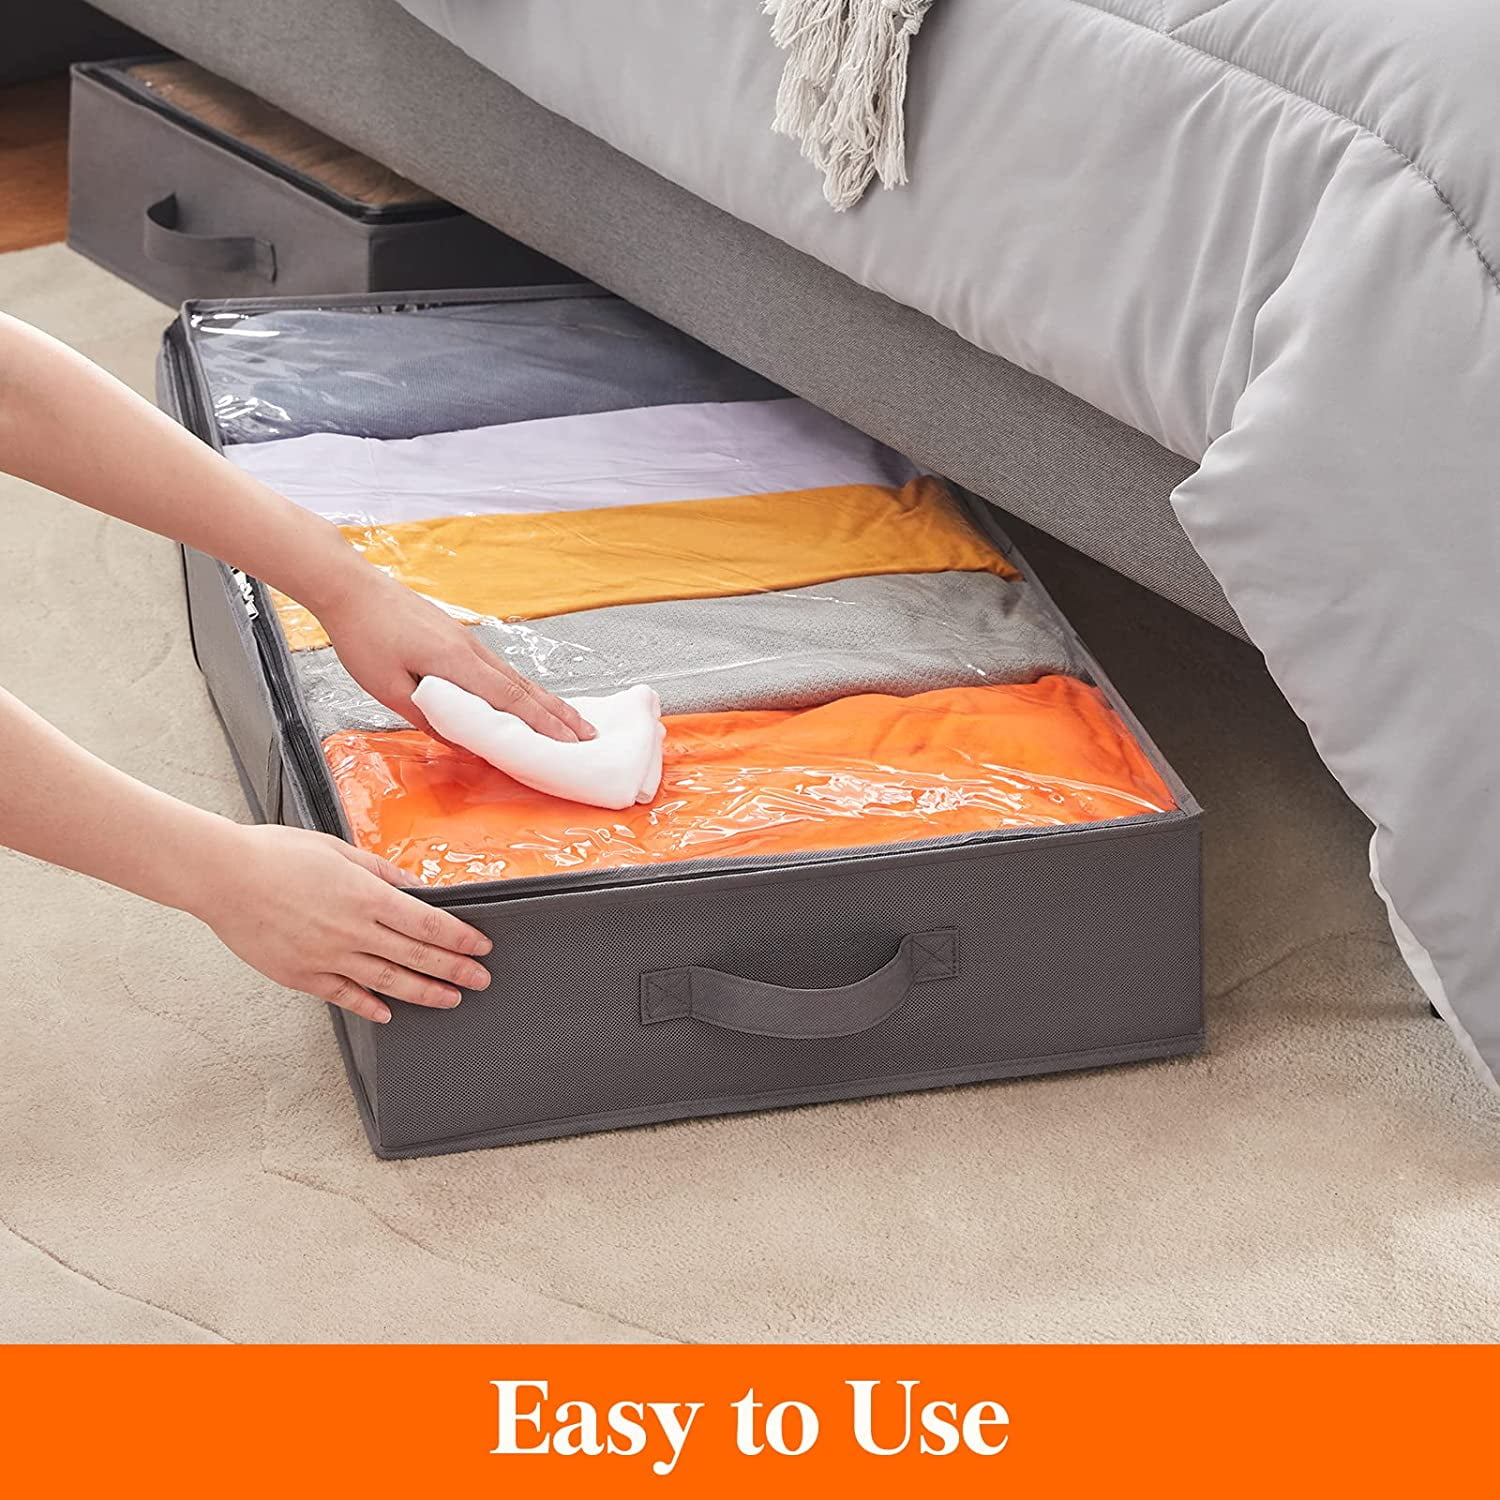 Under Bed Storage Bags for Toys, Shoes - Lifewit – Lifewitstore